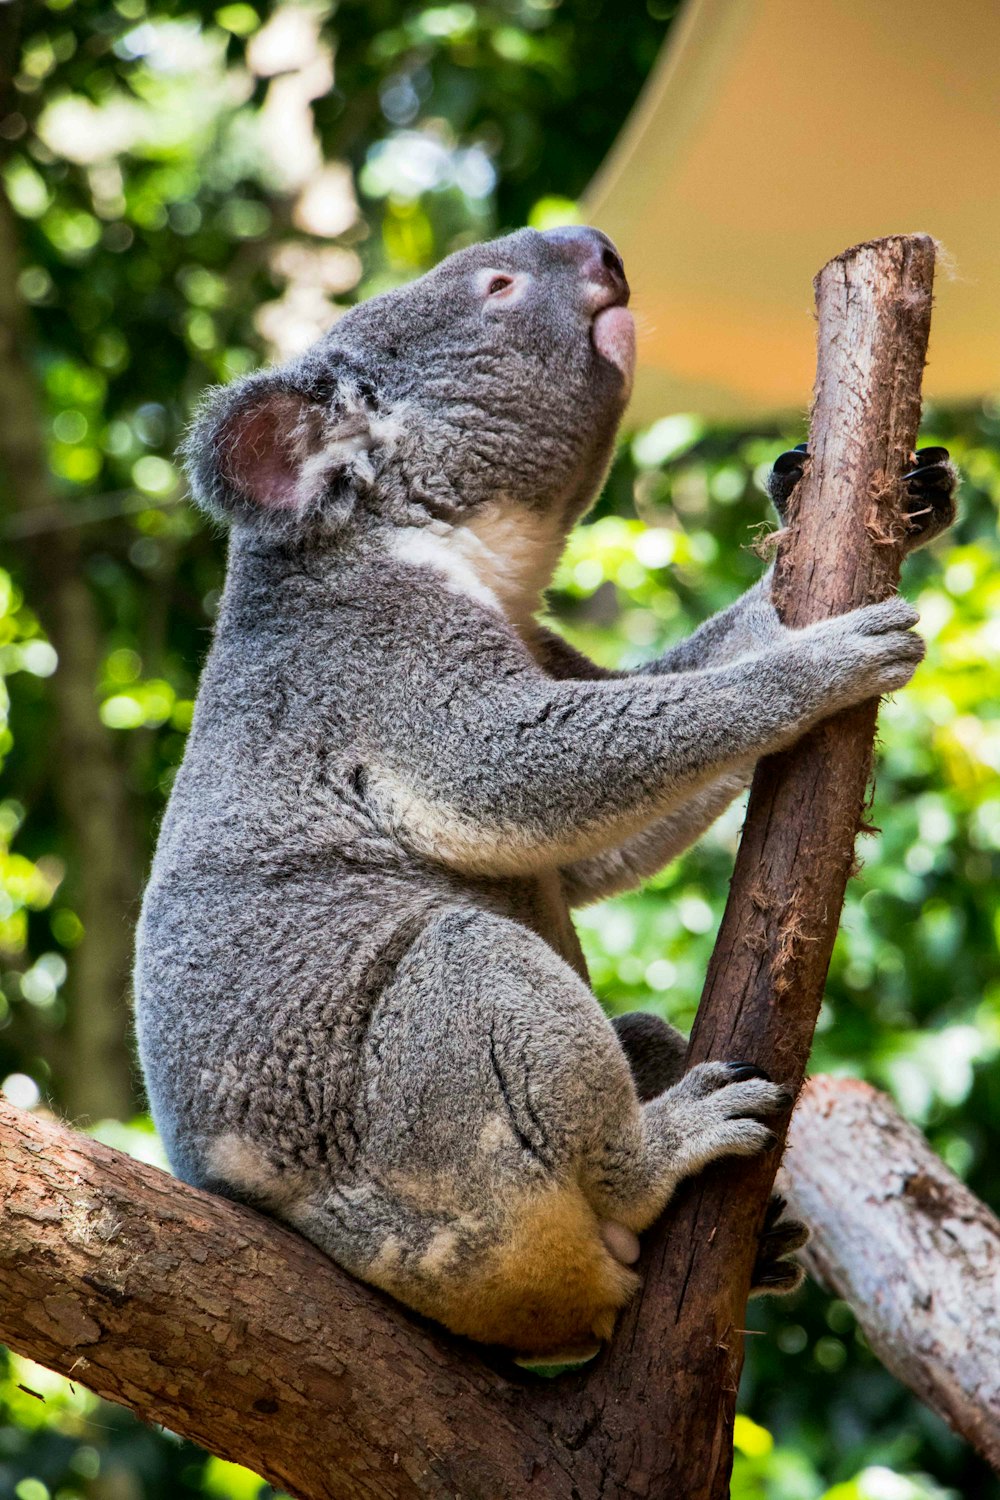 a koala sitting on a tree branch with its mouth open